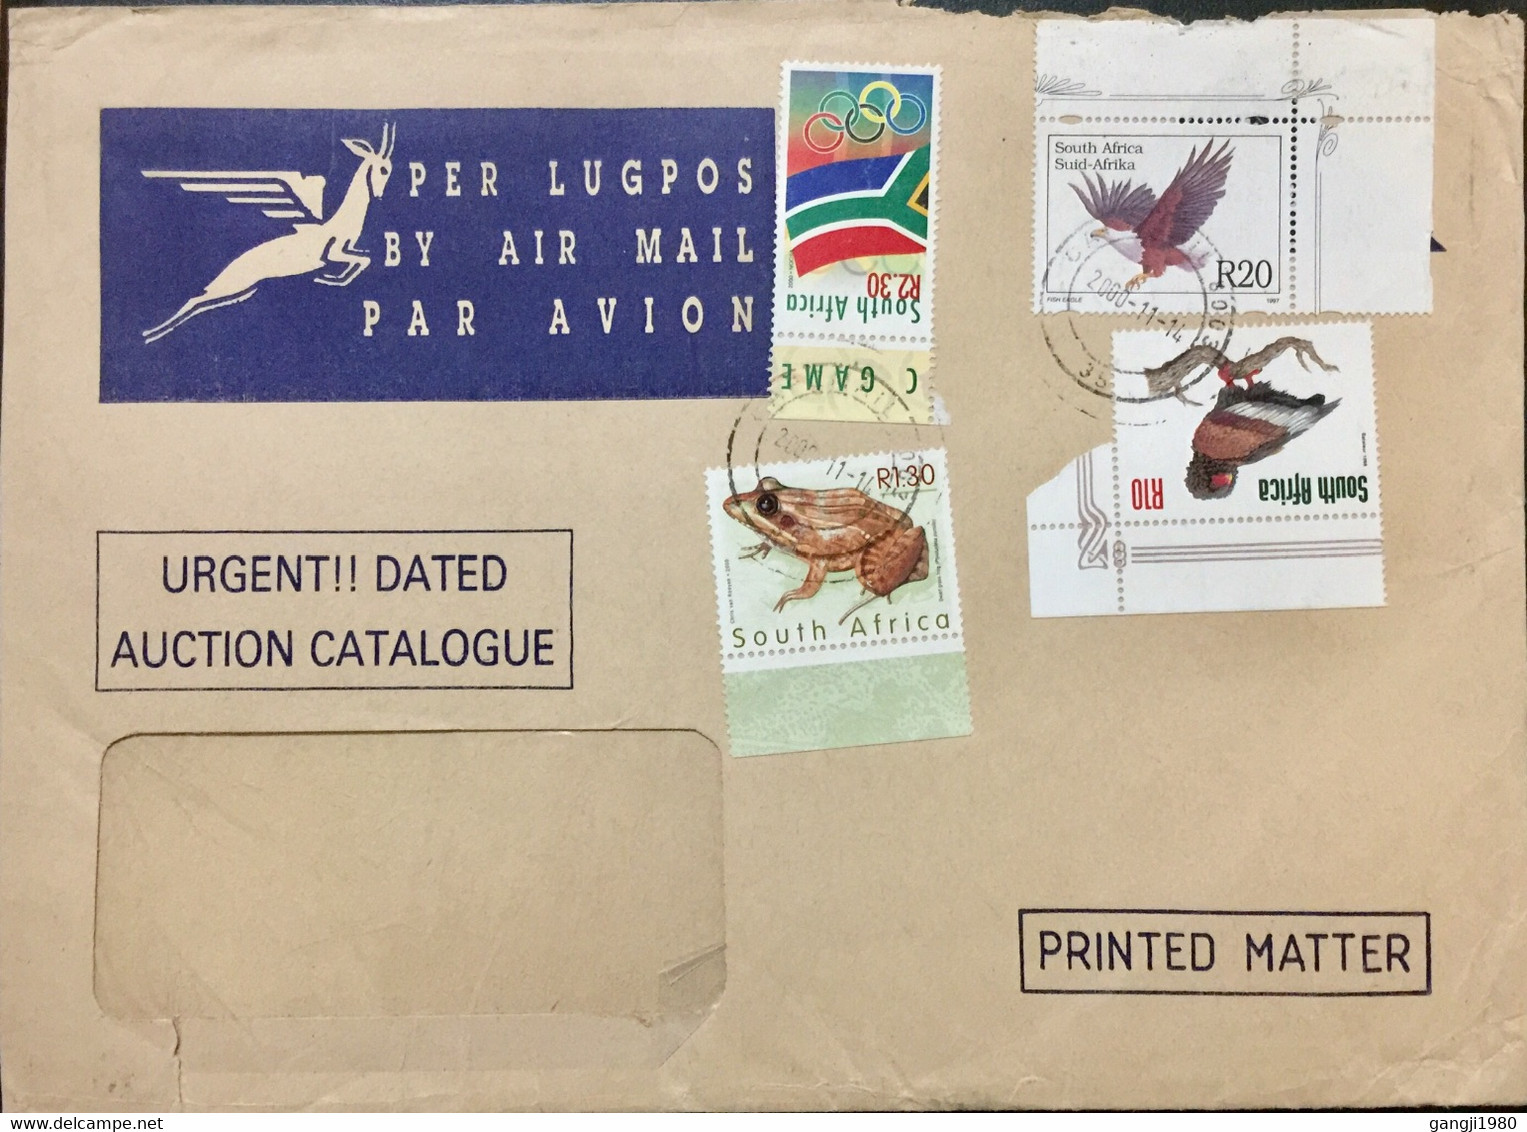 SOUTH AFRICA 2000 ,AIRMAIL FLYING DEER -PRINTED USED COVER, BIRD, FROG ,OLYMPIC, 4 DIFFERENT STAMP USED - Covers & Documents